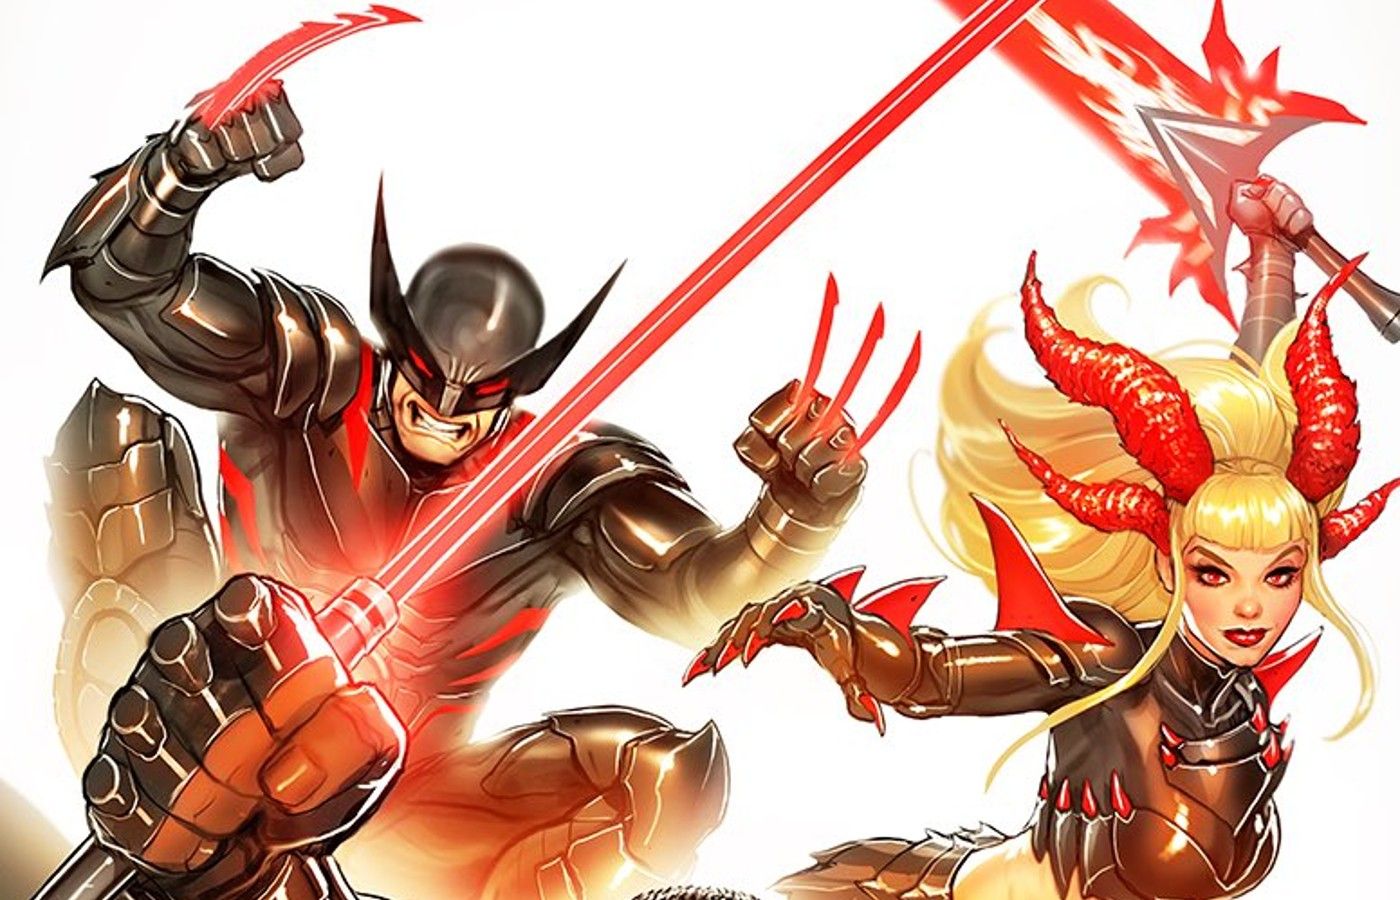 Wolverine’s Claws Get a Demonic Upgrade Thanks to New Armored Costume